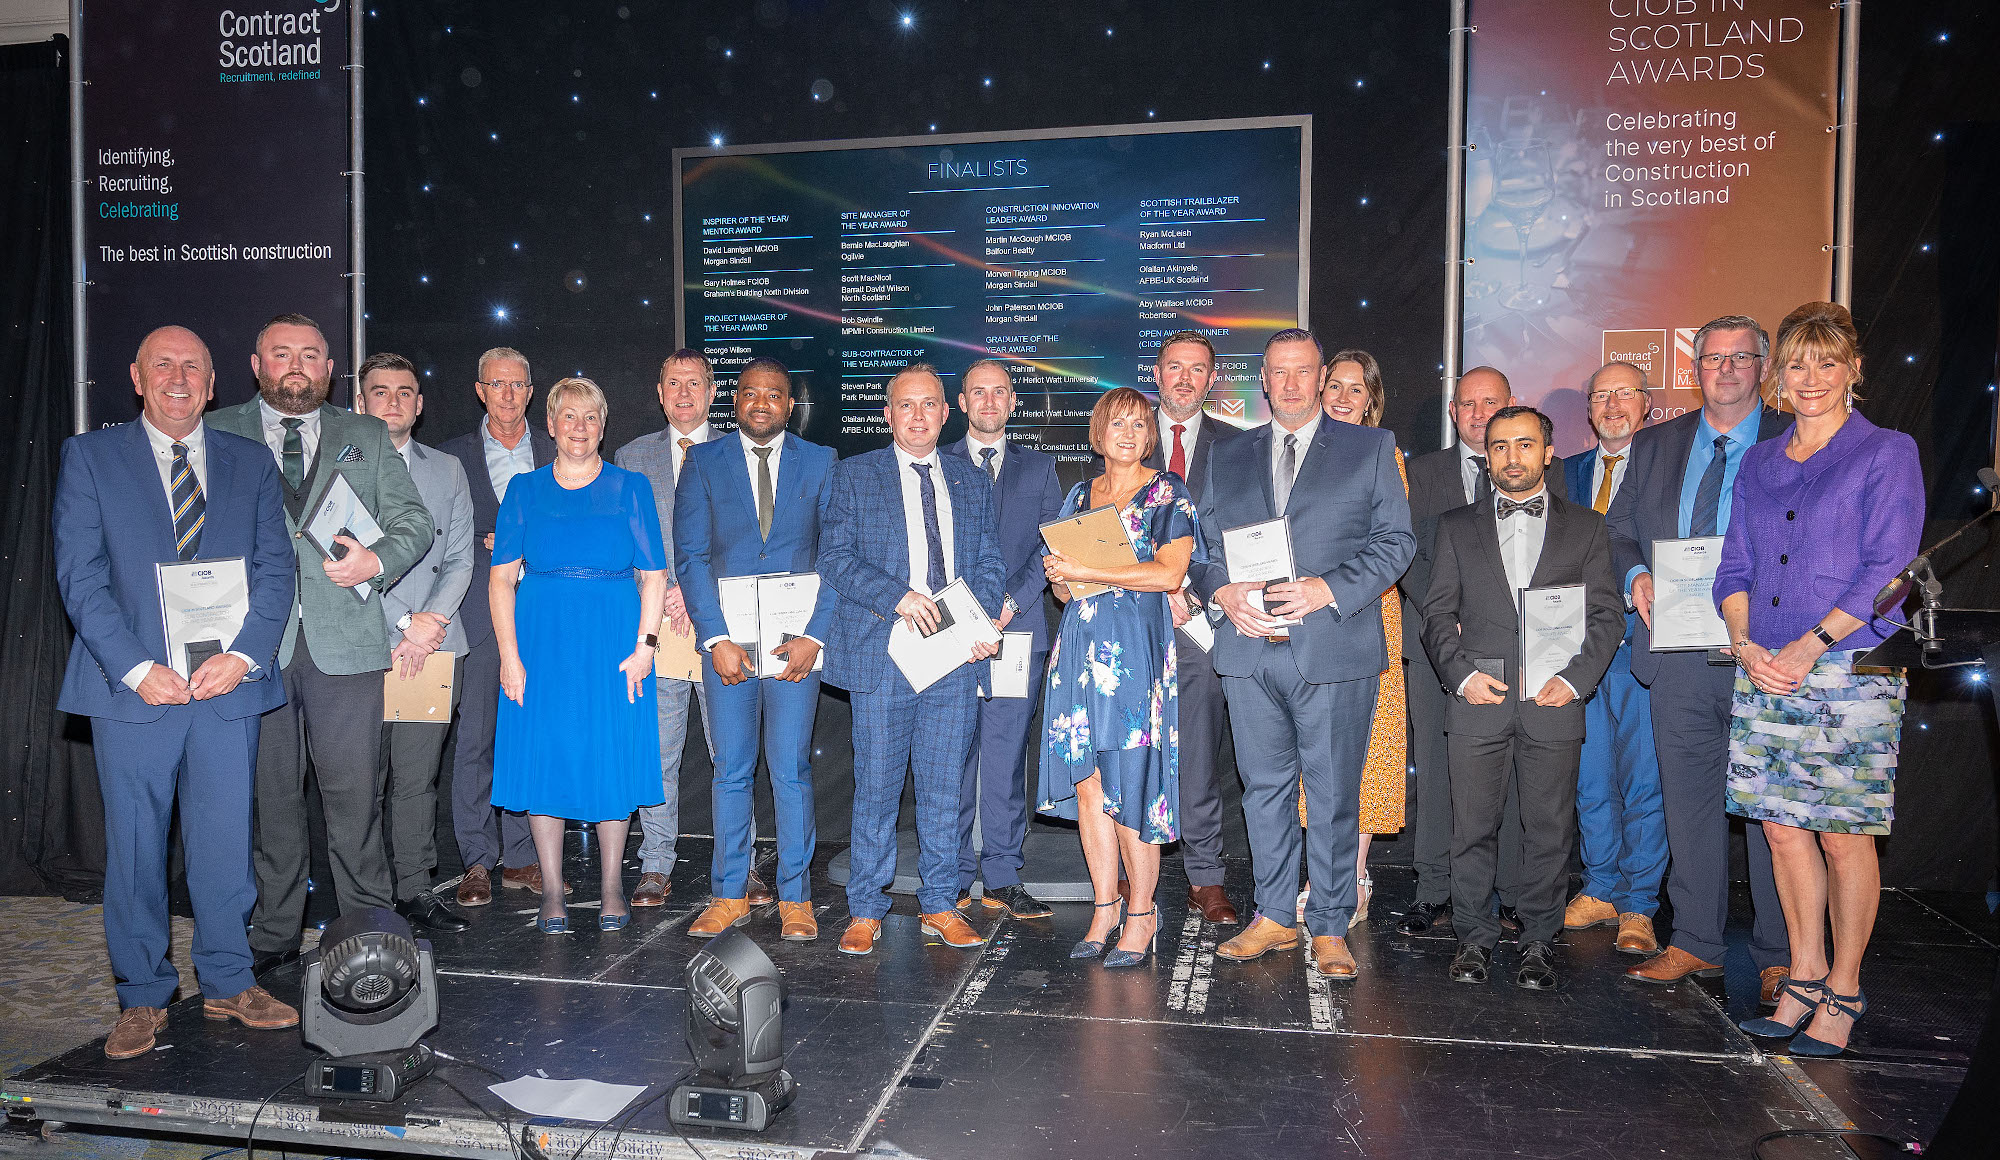 Best in Scottish construction celebrated at CIOB Awards